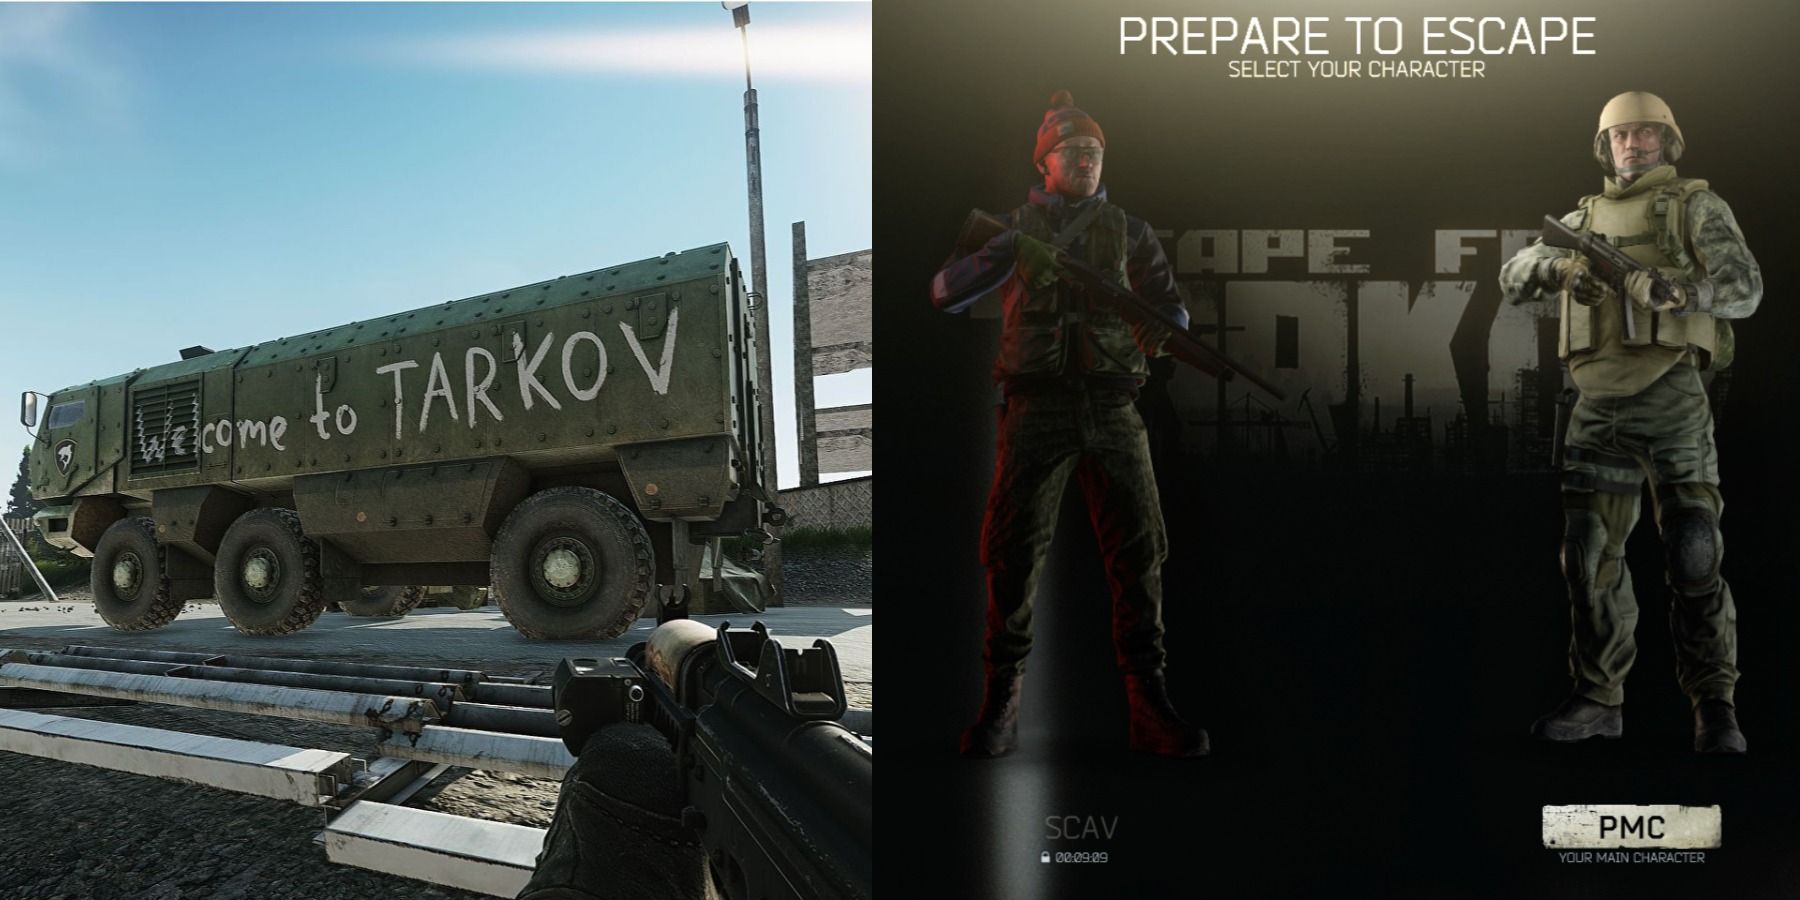 EFT Featured - Welcome To Tarkov &amp; Scav PMC Characters